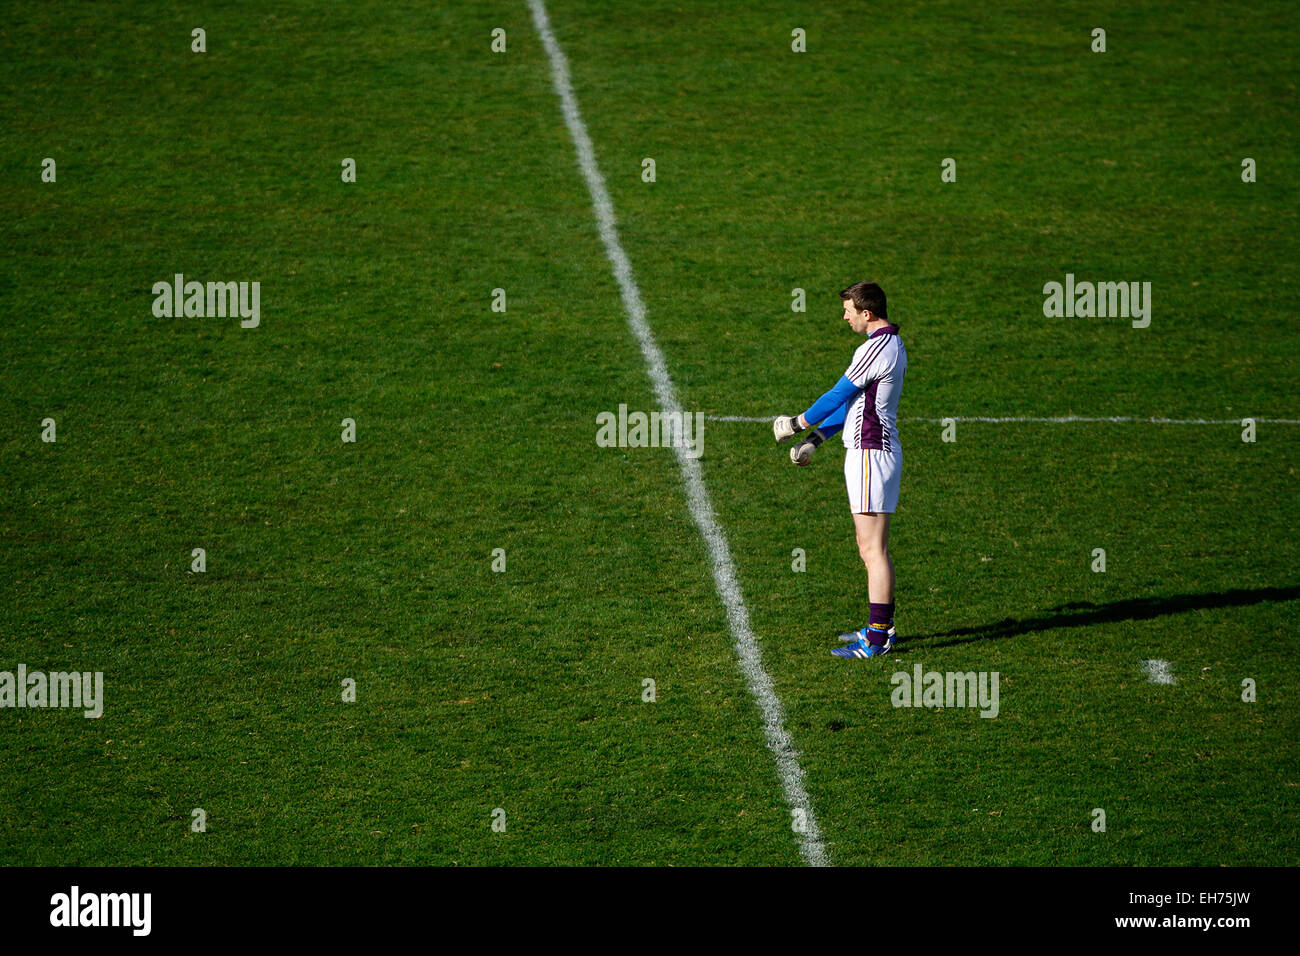 Wexford, Ireland. 8th March, 2015. 8th March 2015 -GAA  Anthony Masterson of Wexford, Allianz Football LeagueL Division 3 Played in Wexford Park. Wexford 1-16 Vs  Limerick 2-12 Credit:  Jimmy Whhittee/Alamy Live News Stock Photo